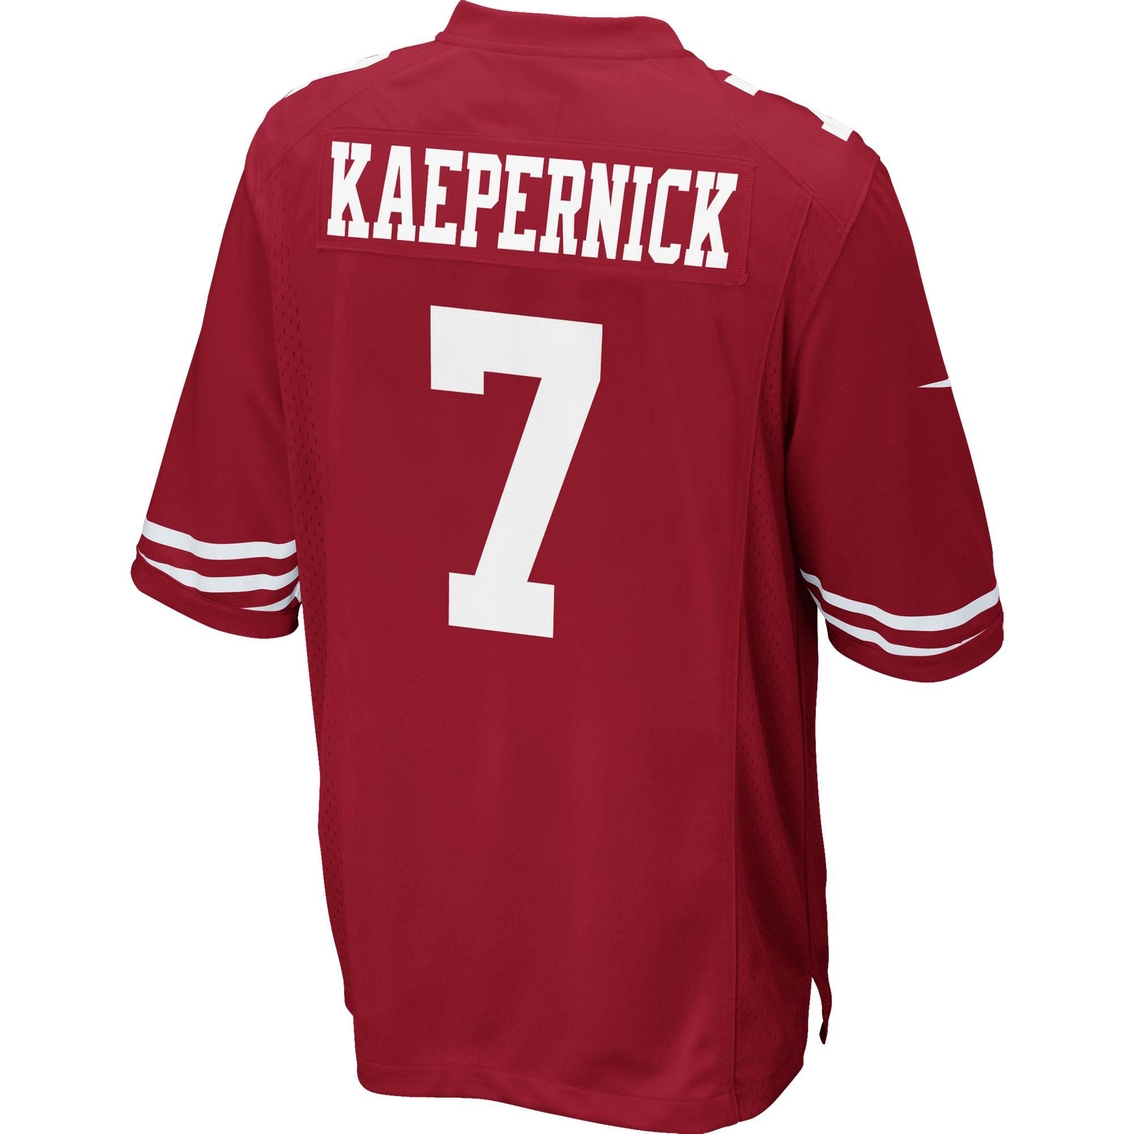 49ers official game jersey